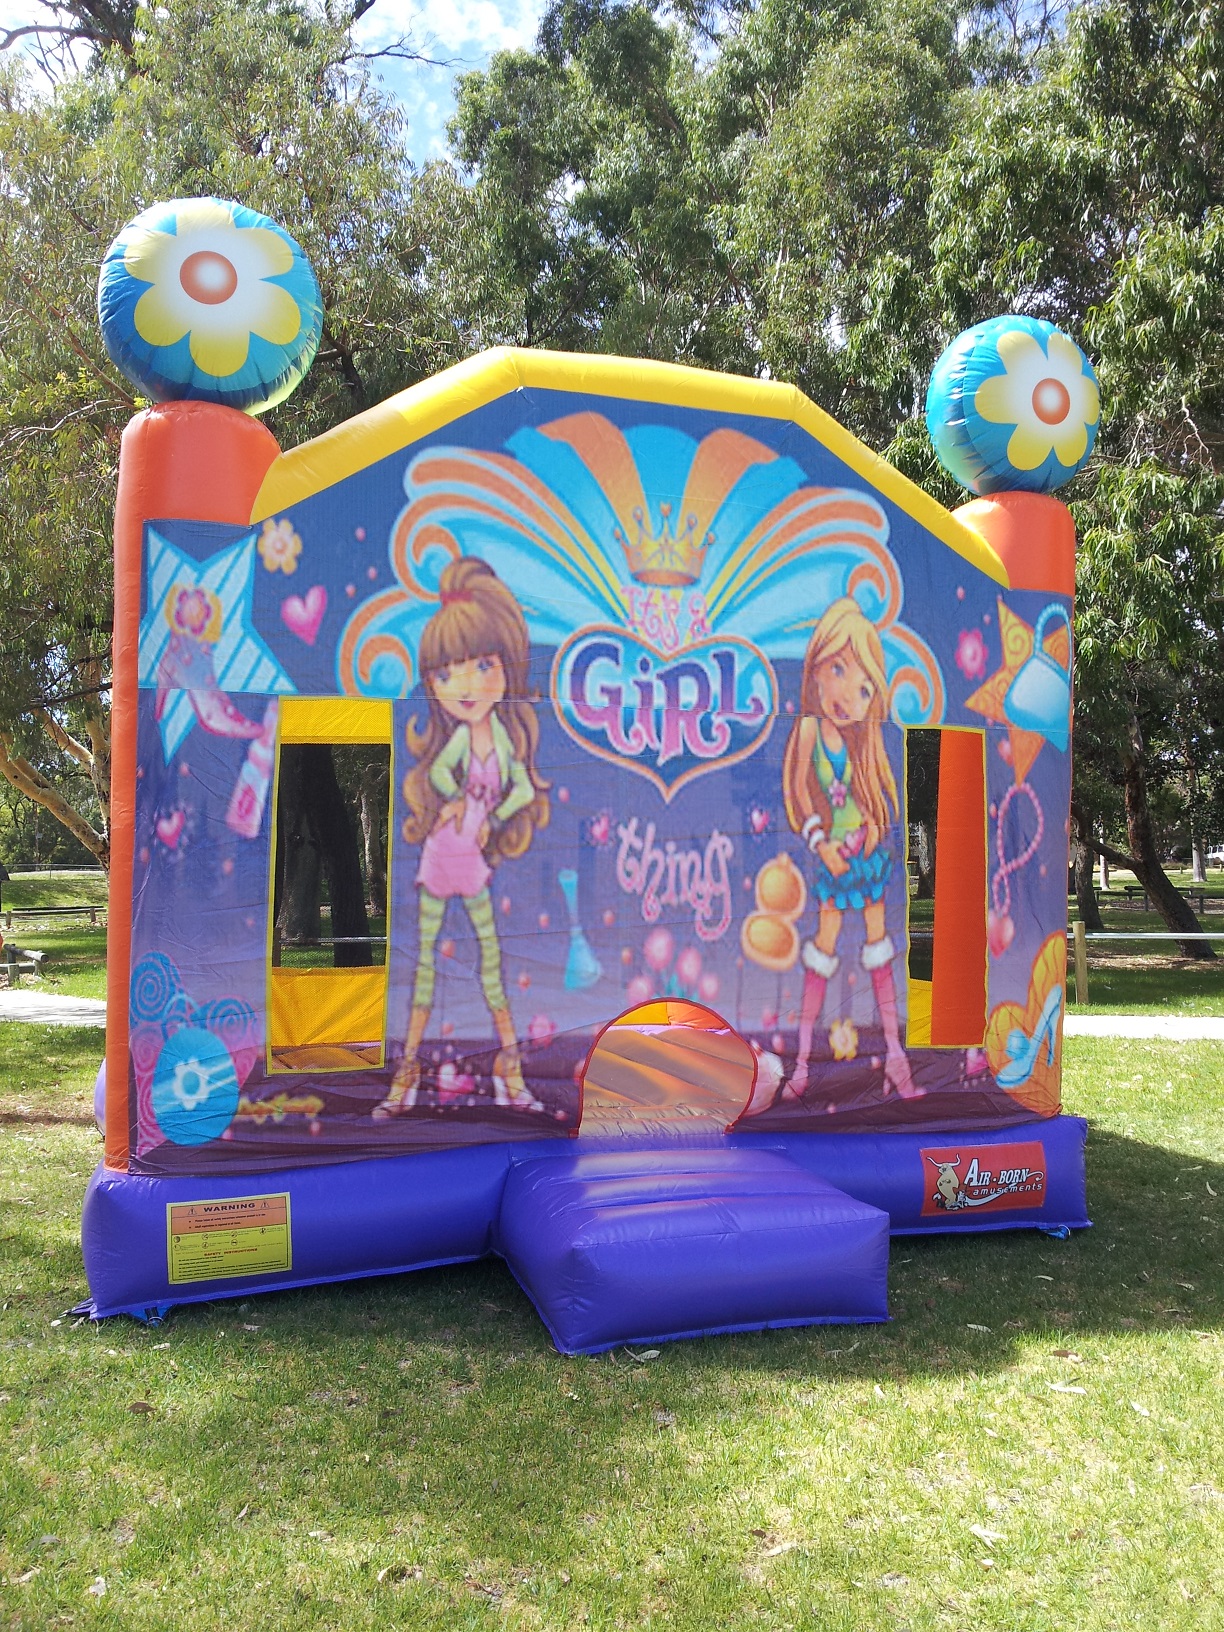 Girl Thing Bouncy Castle Amusement Ride Hire In Perth